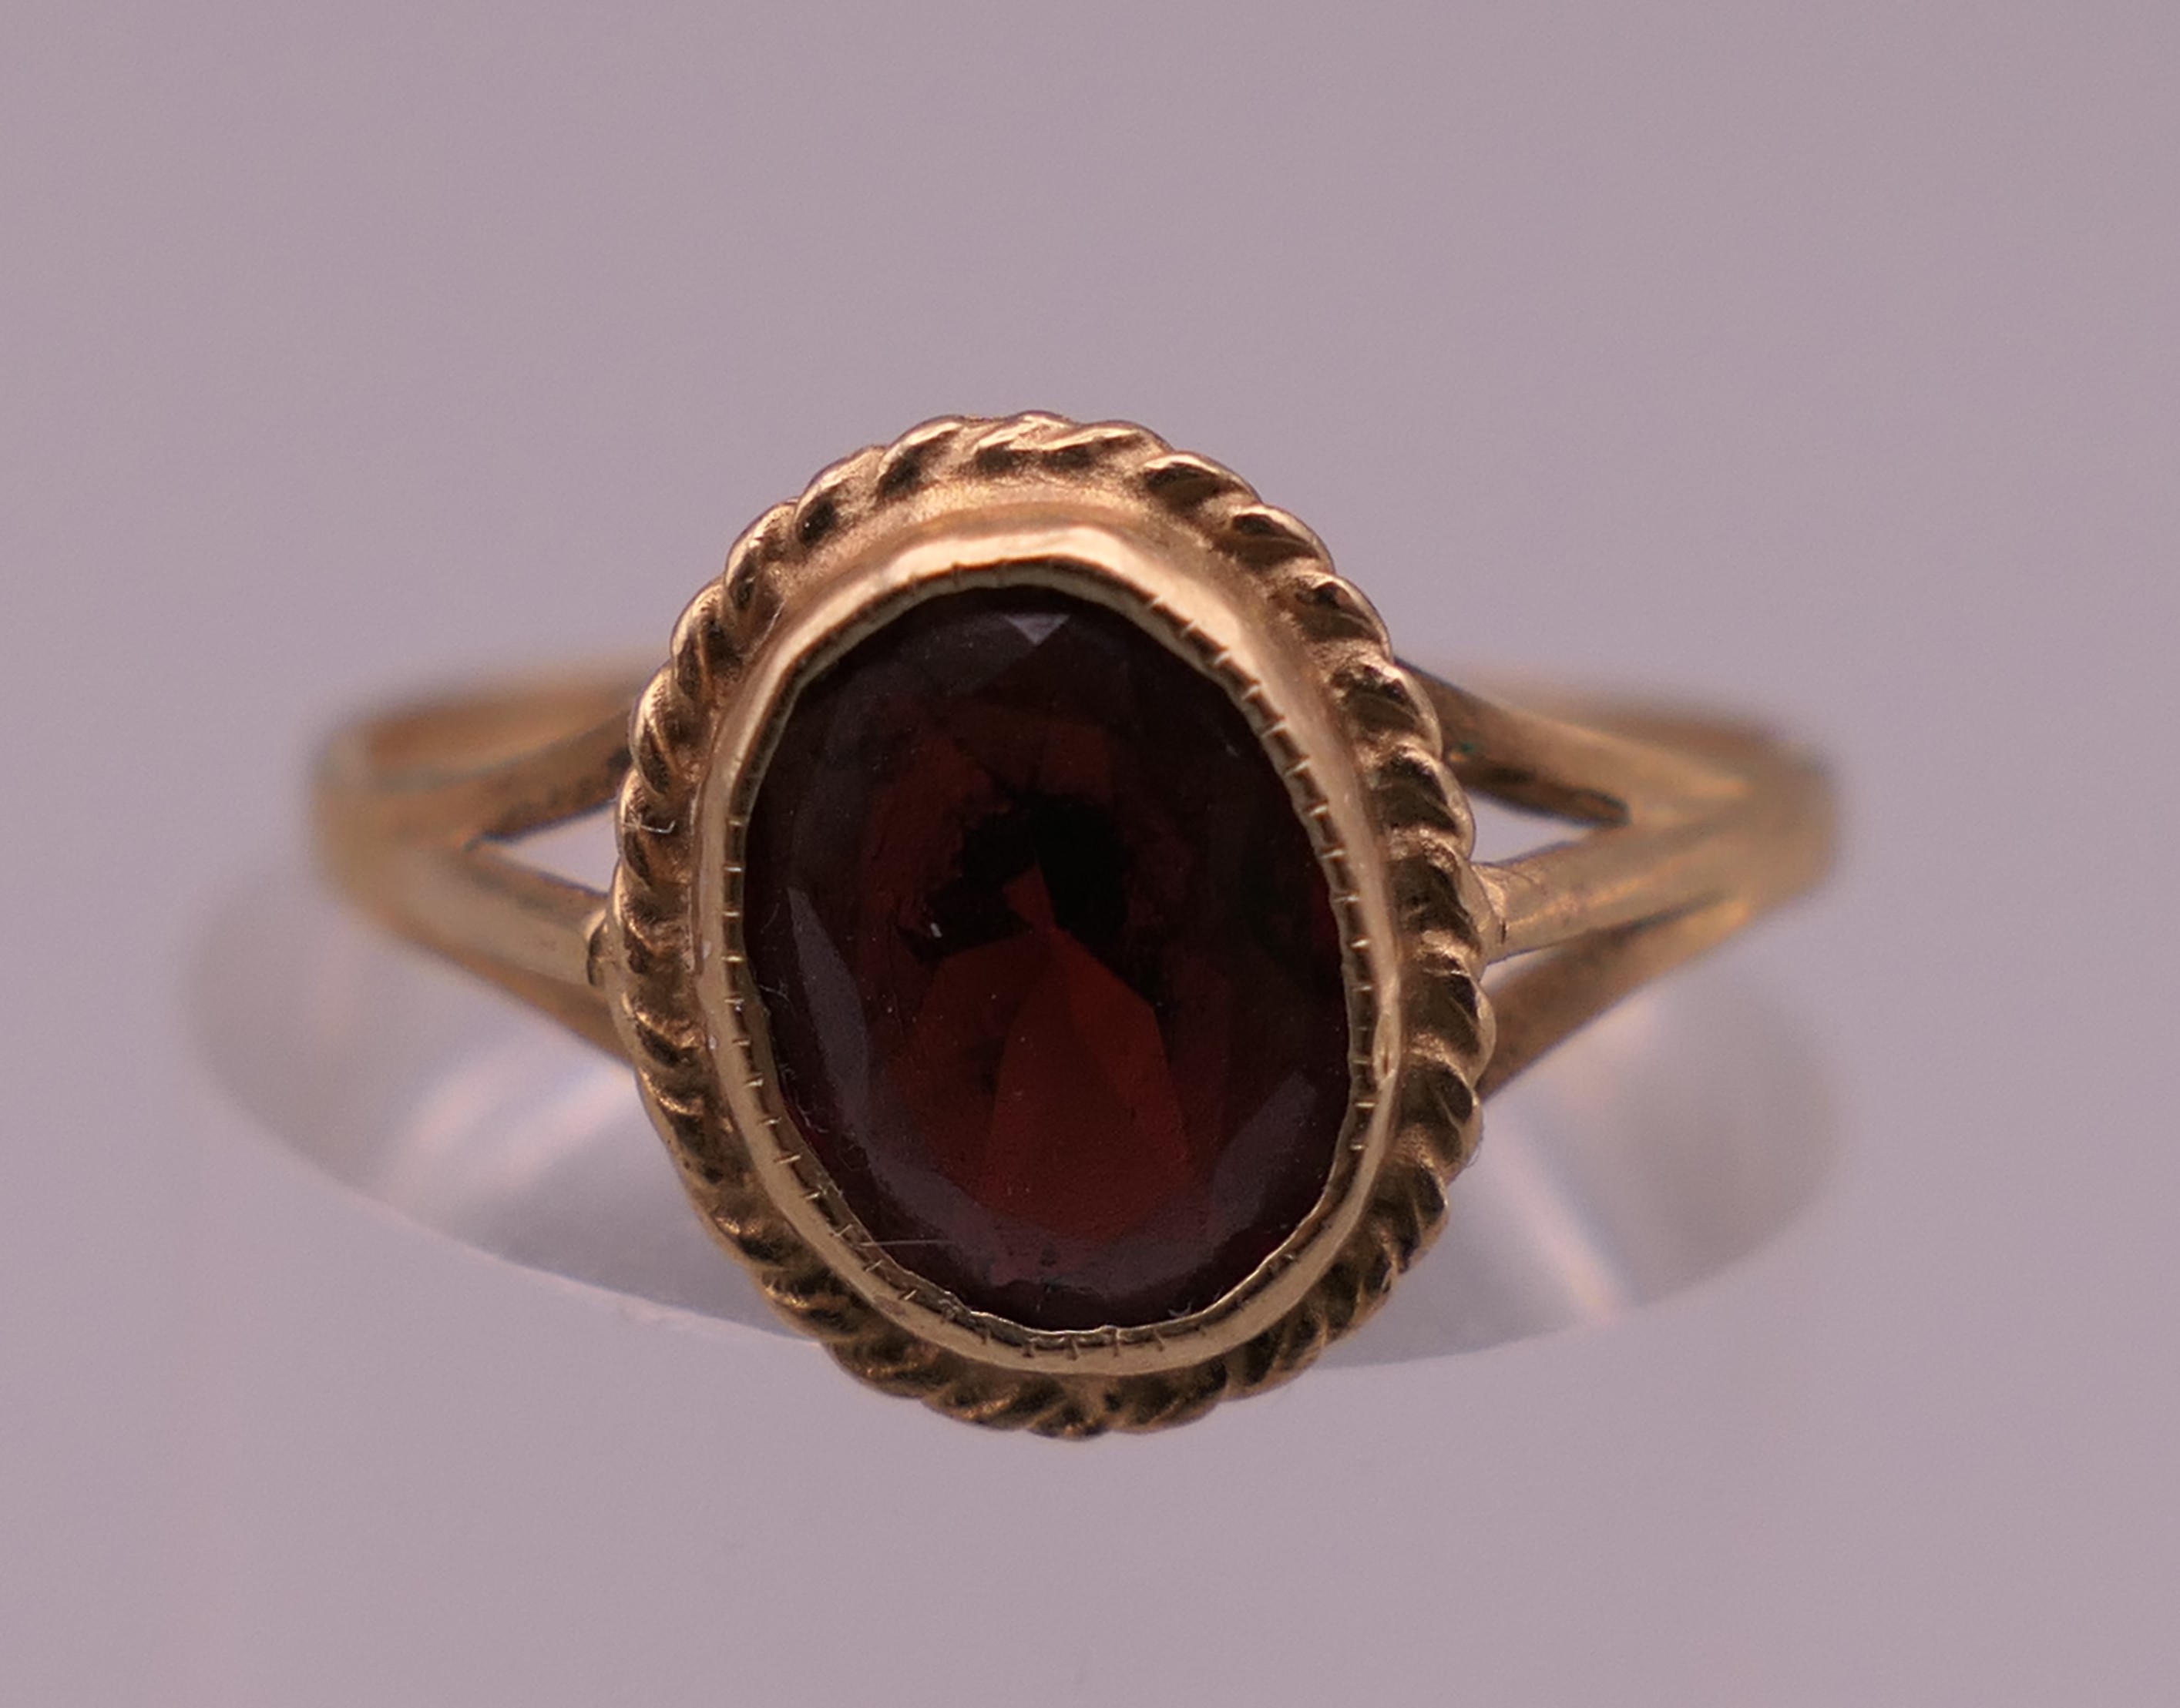 A 9 ct gold garnet ring. Ring size L/M. 1.5 grammes total weight.